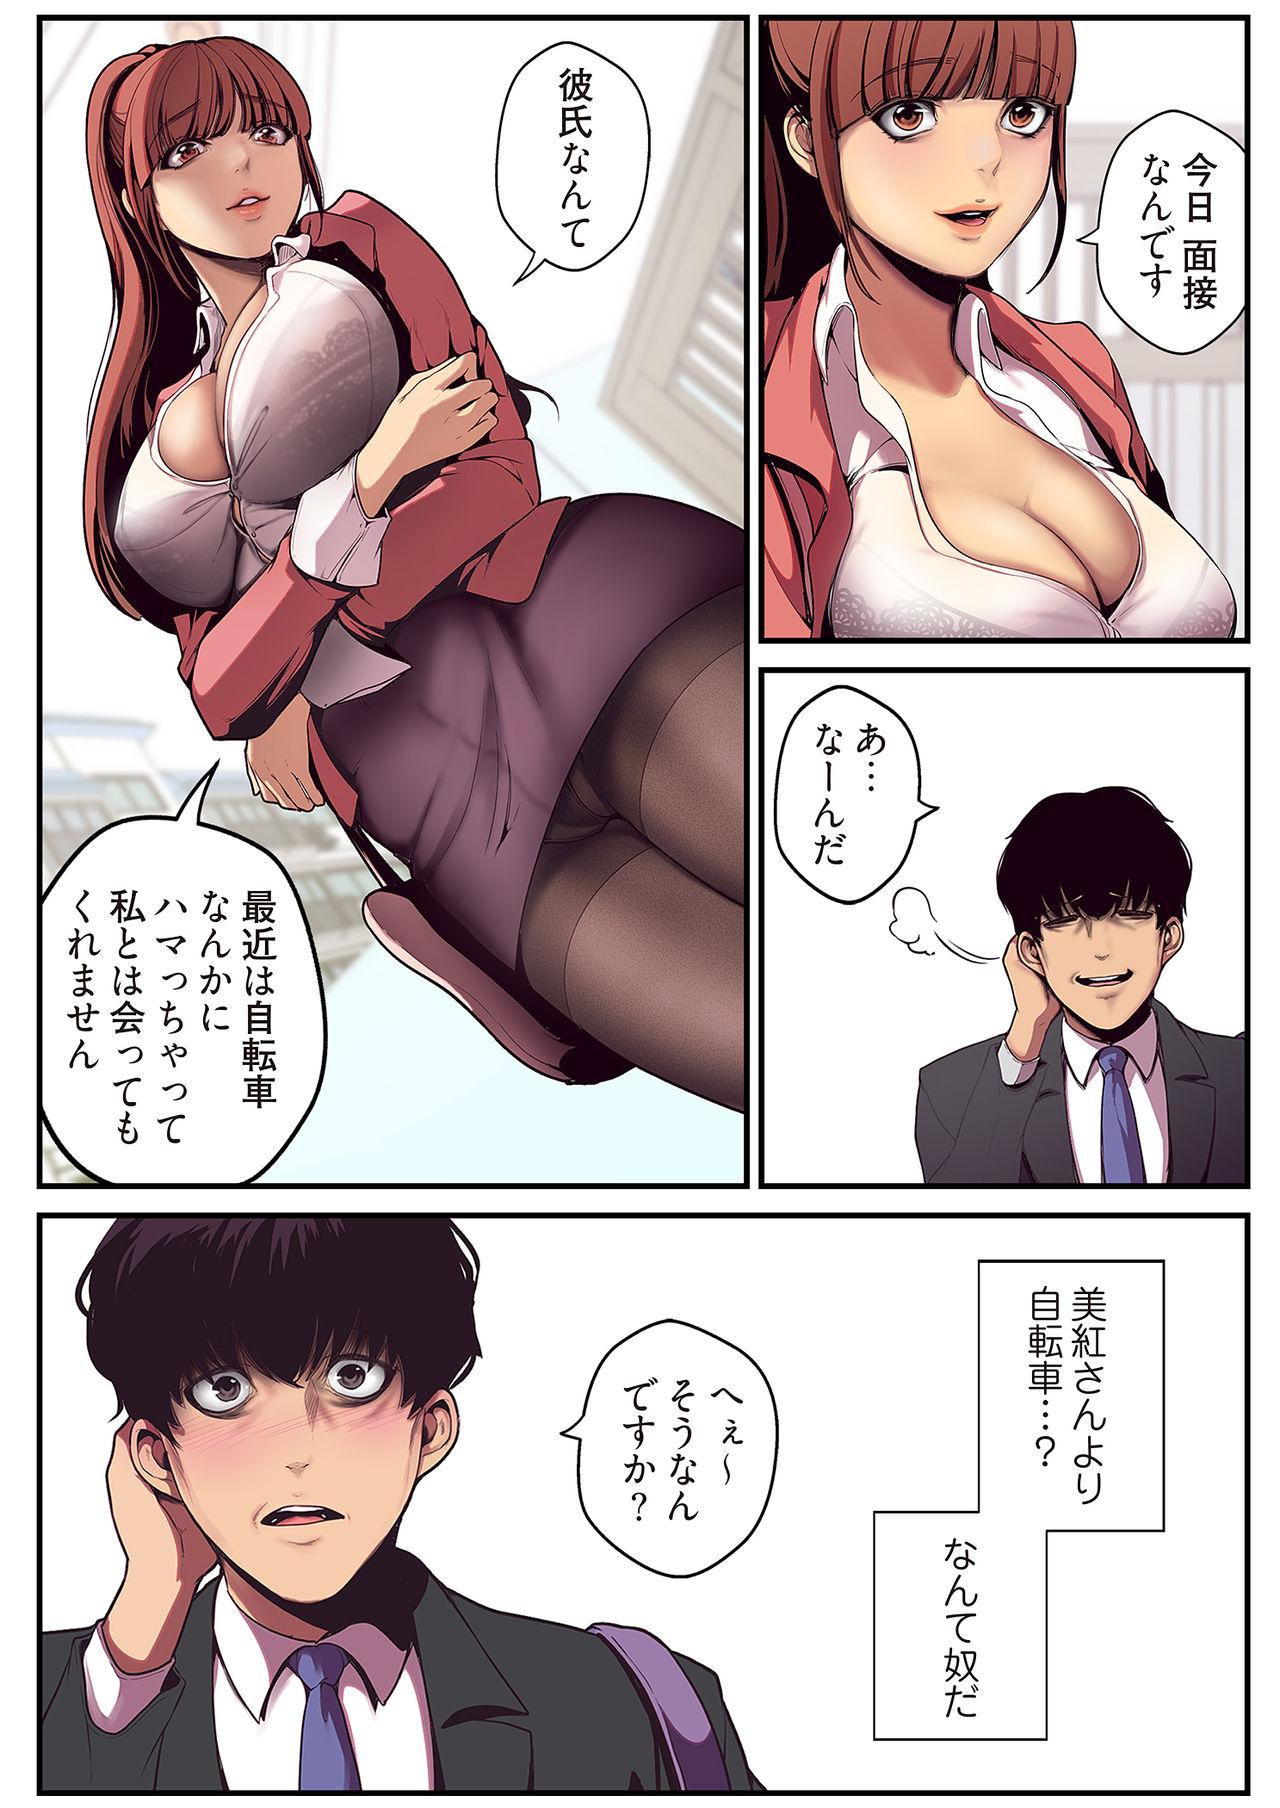 Flogging すばらしき新世界 01-03 And - Page 10